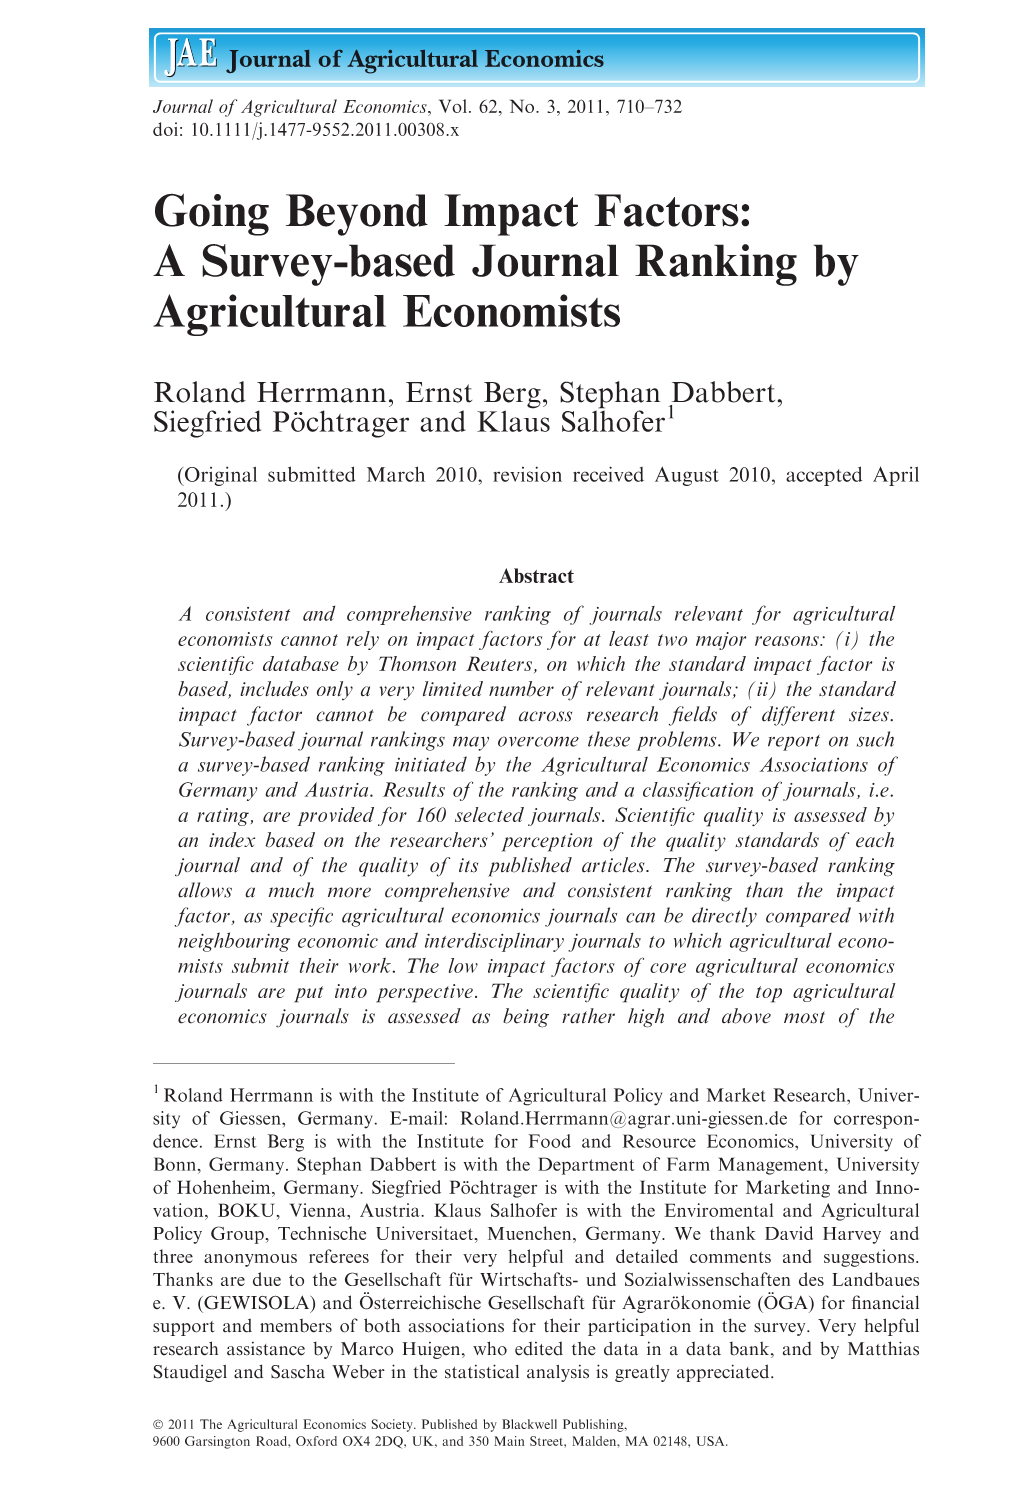 A Surveybased Journal Ranking by Agricultural Economists